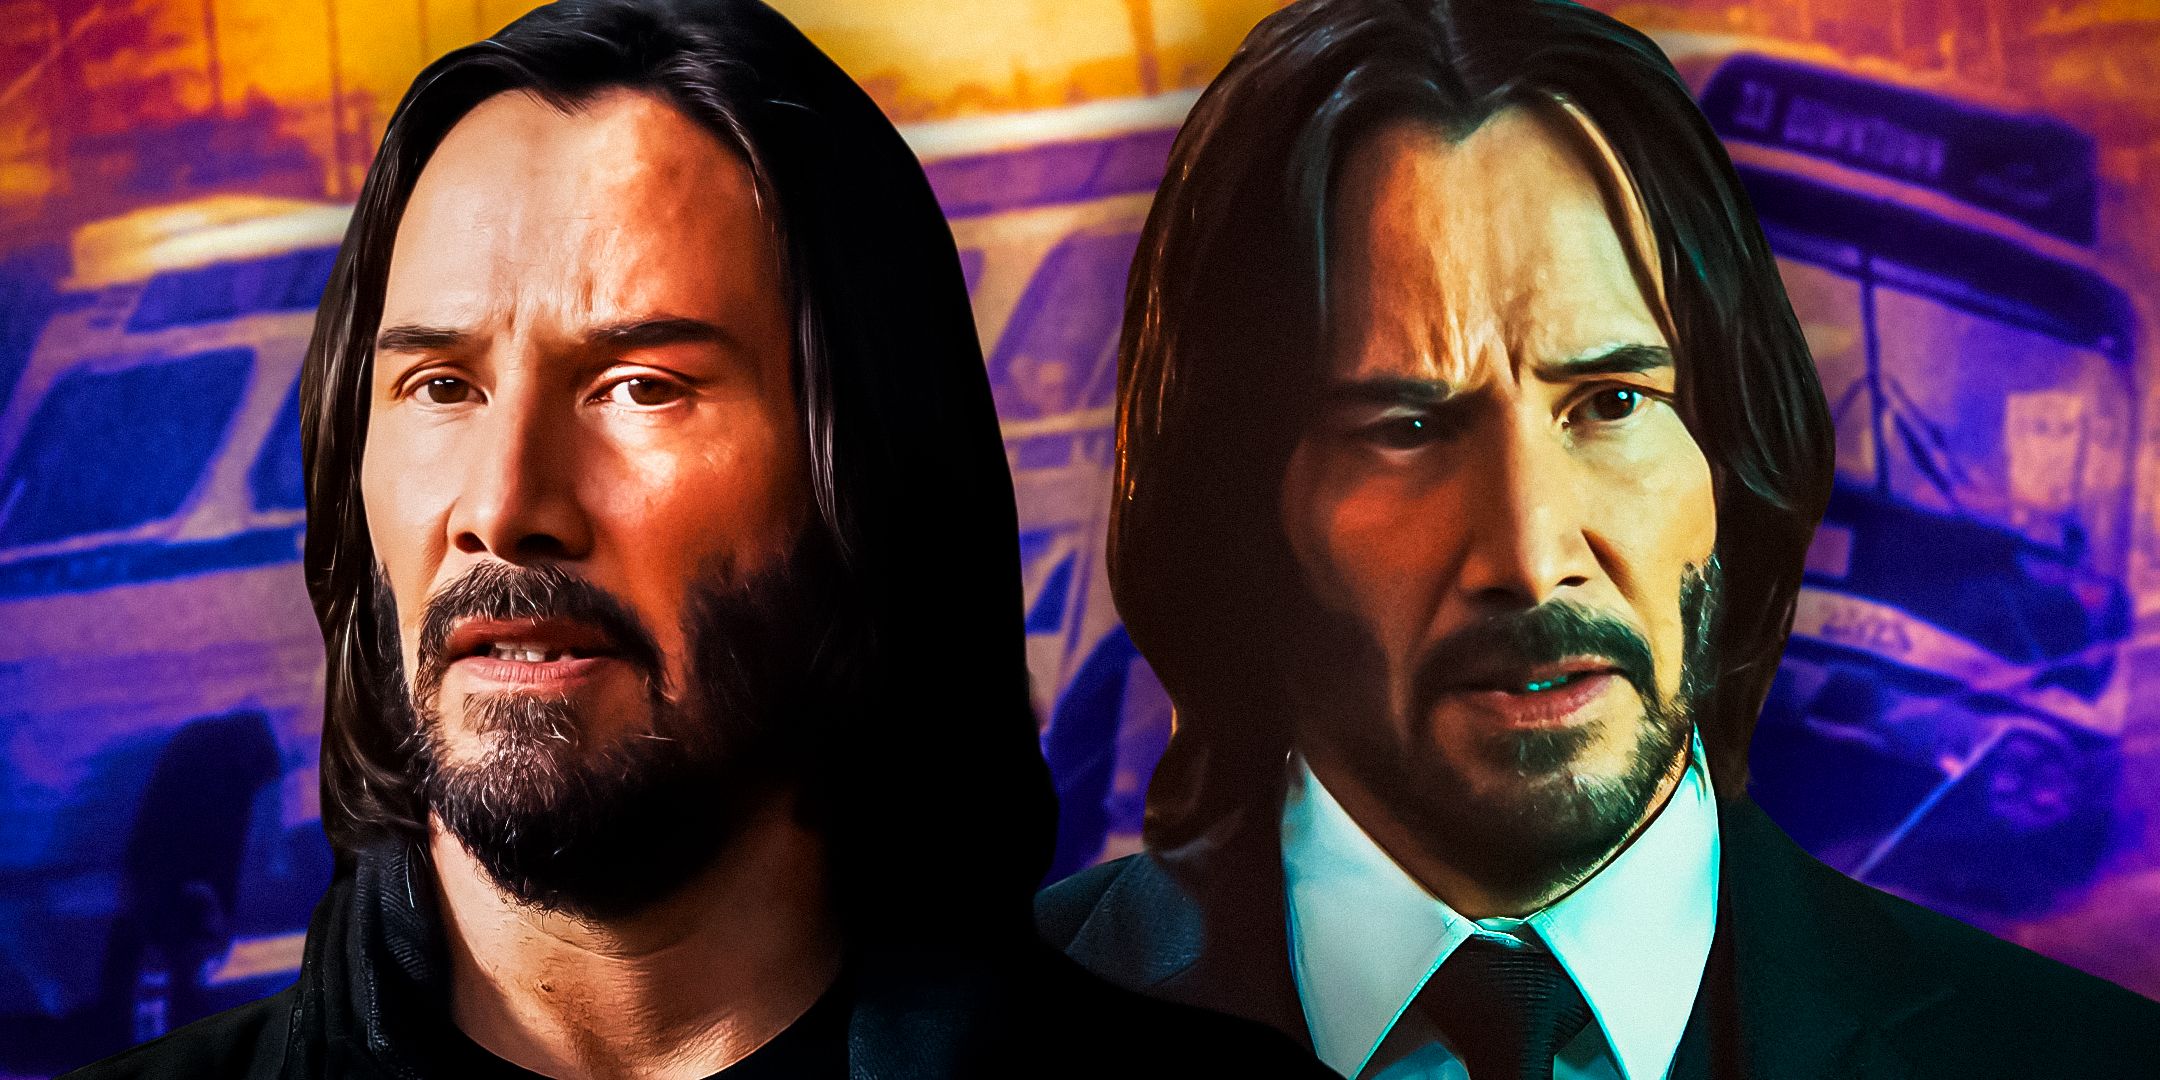 Keanu-Reeves-as-Neo-from-The-Matrix-Movies,-and-as-John-Wick-from-The-John-Wick-Movies-